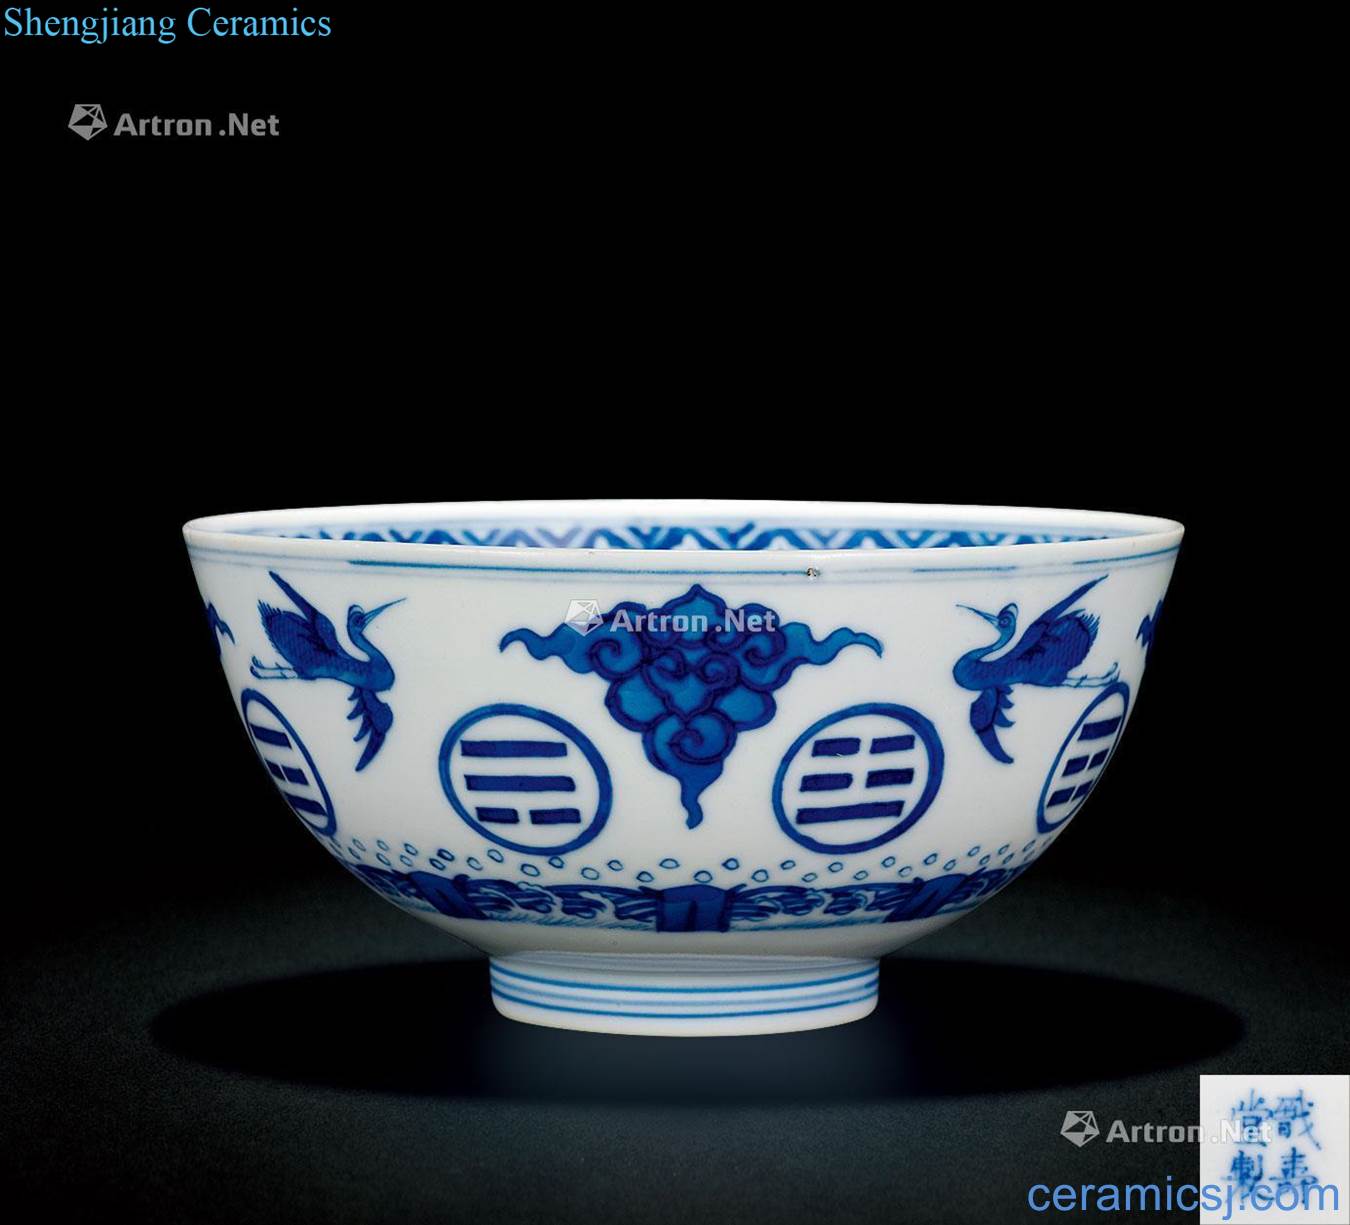 The late qing dynasty Blue and white gossip James t. c. na was published green-splashed bowls